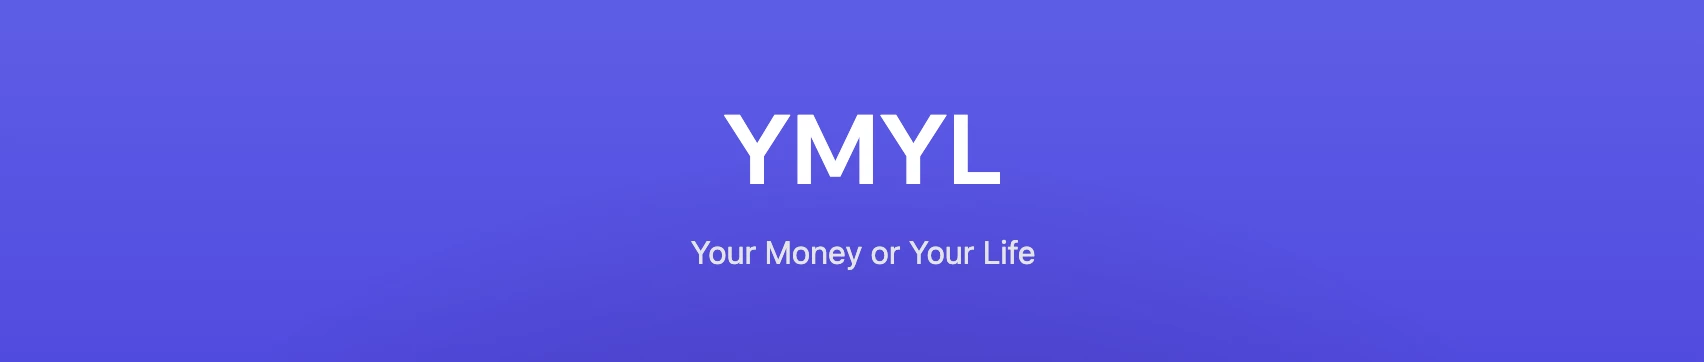 your money or your life 